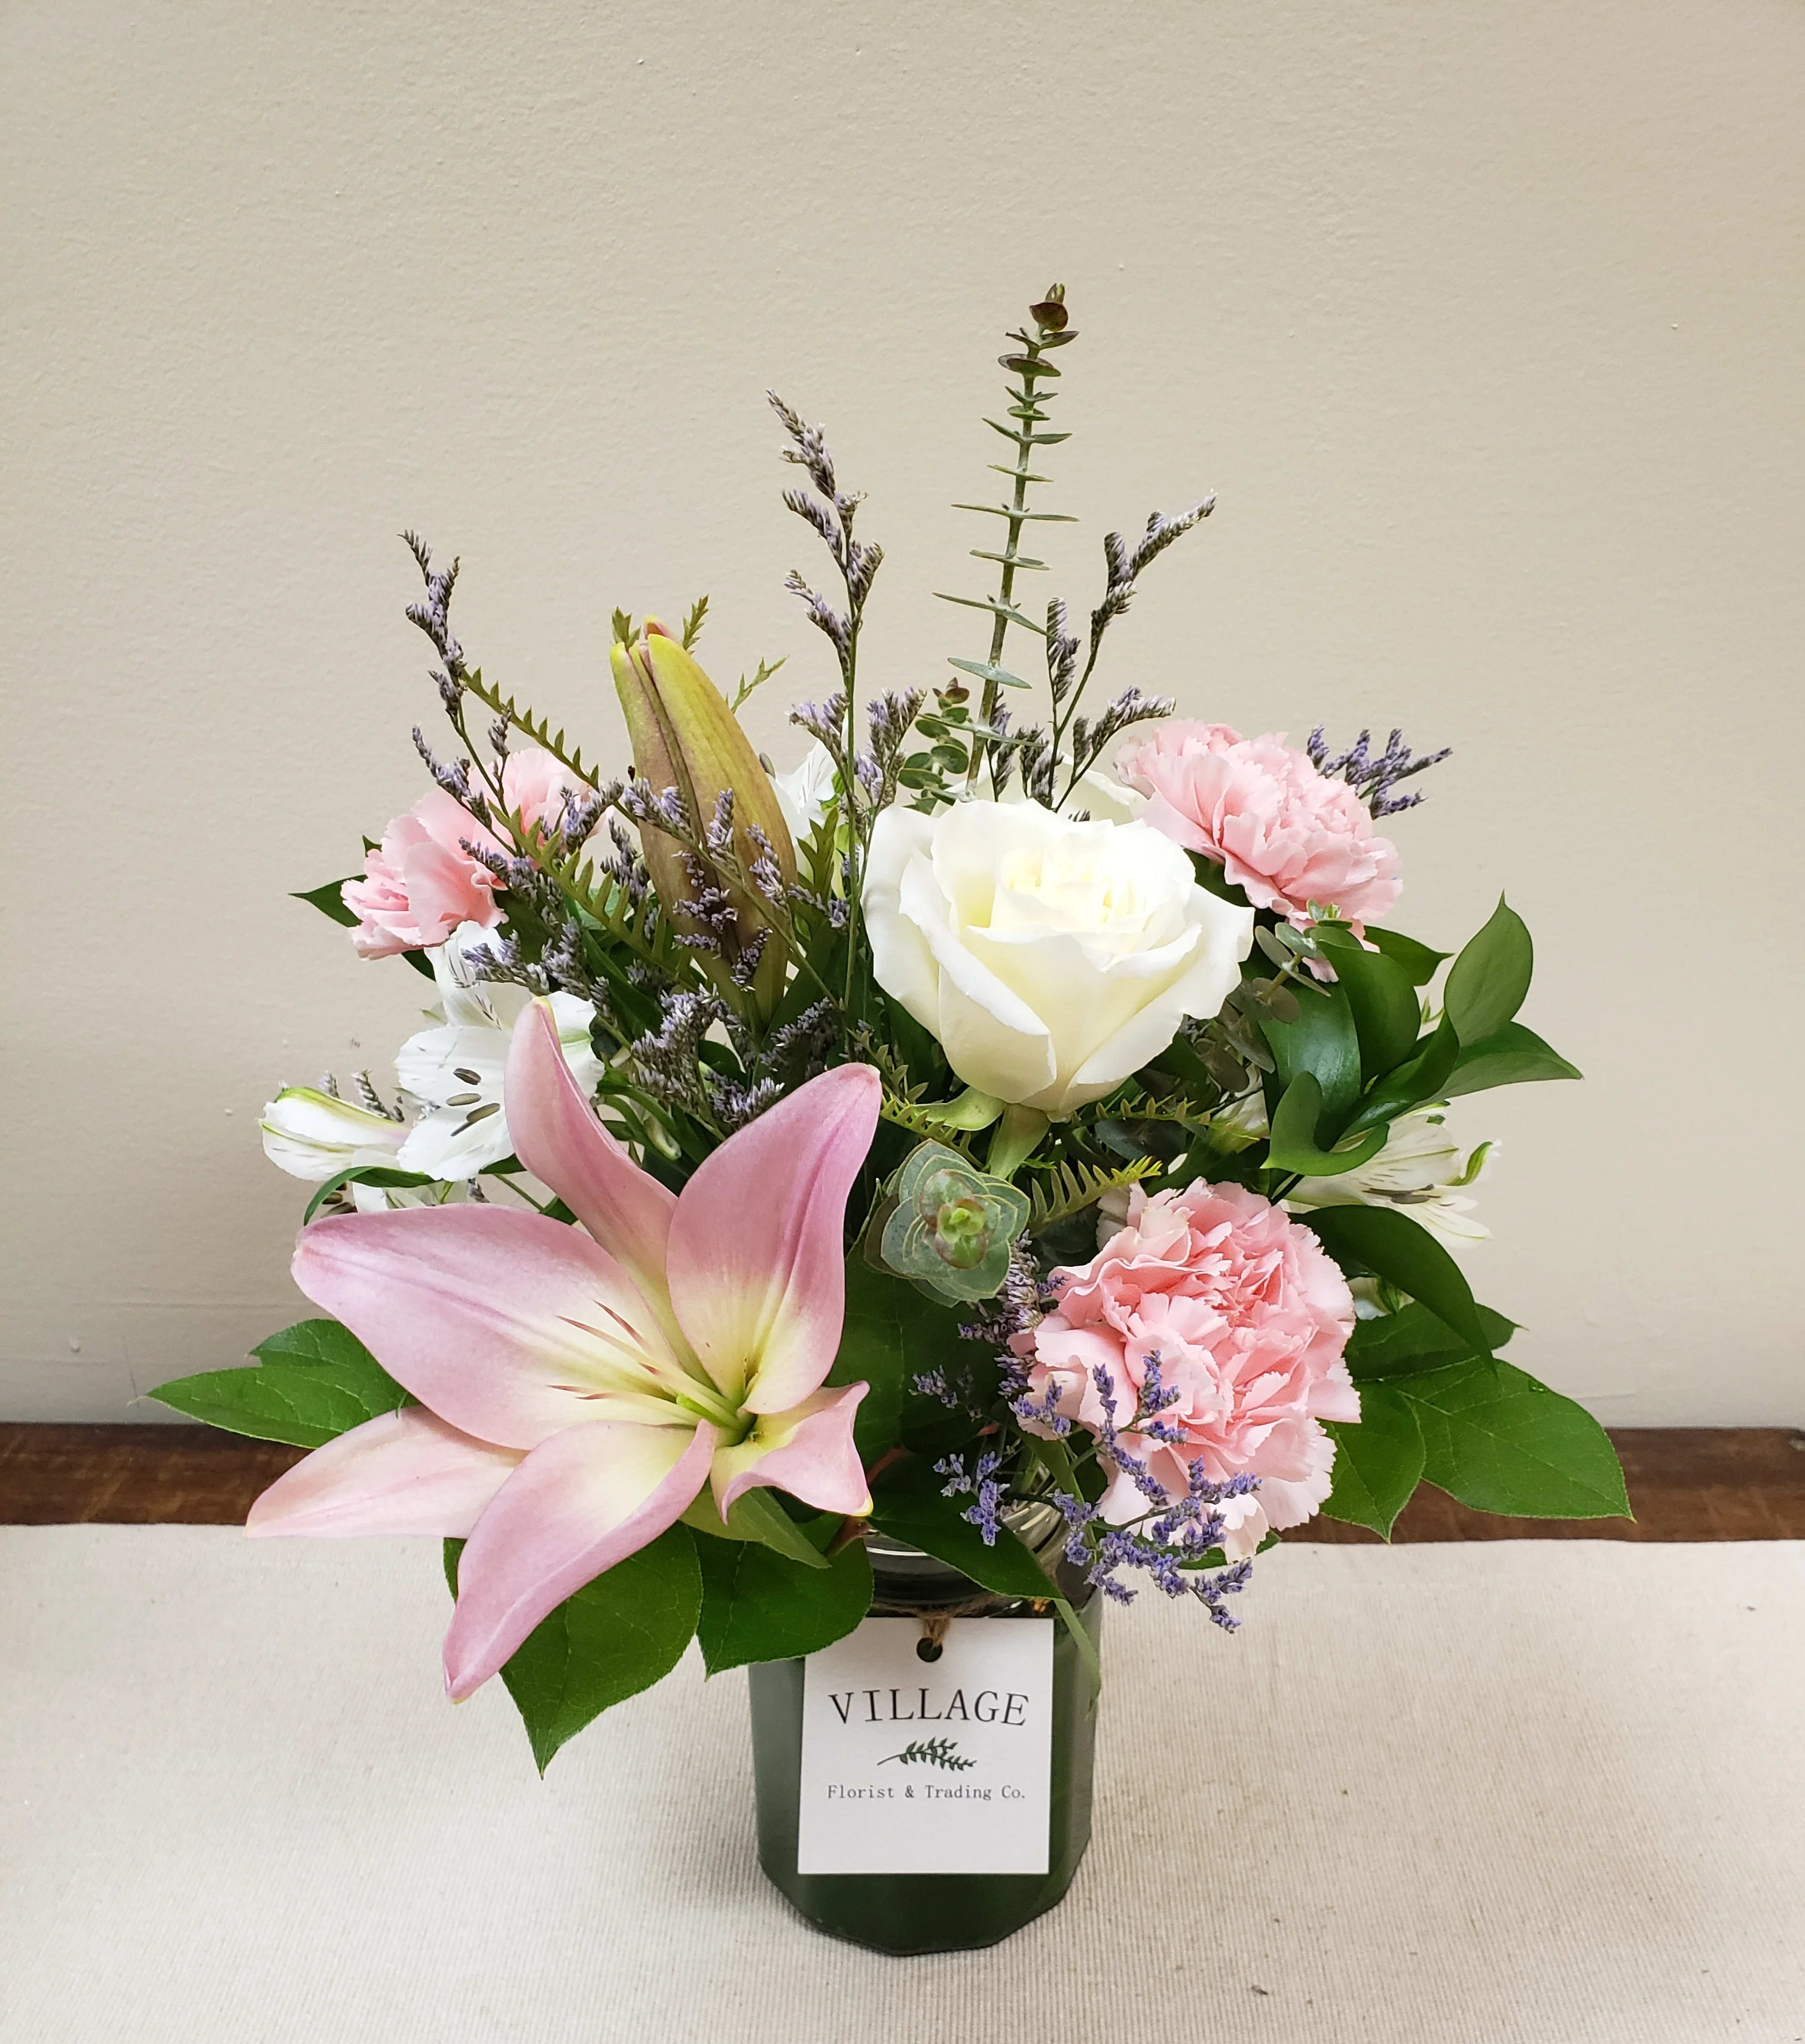 Always and Forever Collection (Modern Petite) - Always and Forever (Modern Petite) is a soft and romantic mix of pink lilies, white Alstroemeria, Pink carnations, white roses, Ruscus, Eucalyptus, Lemon Leaf and Limonium for that whimsical final touch. Tastefully arranged in a clear glass vase with an aspidistra leaf lining.